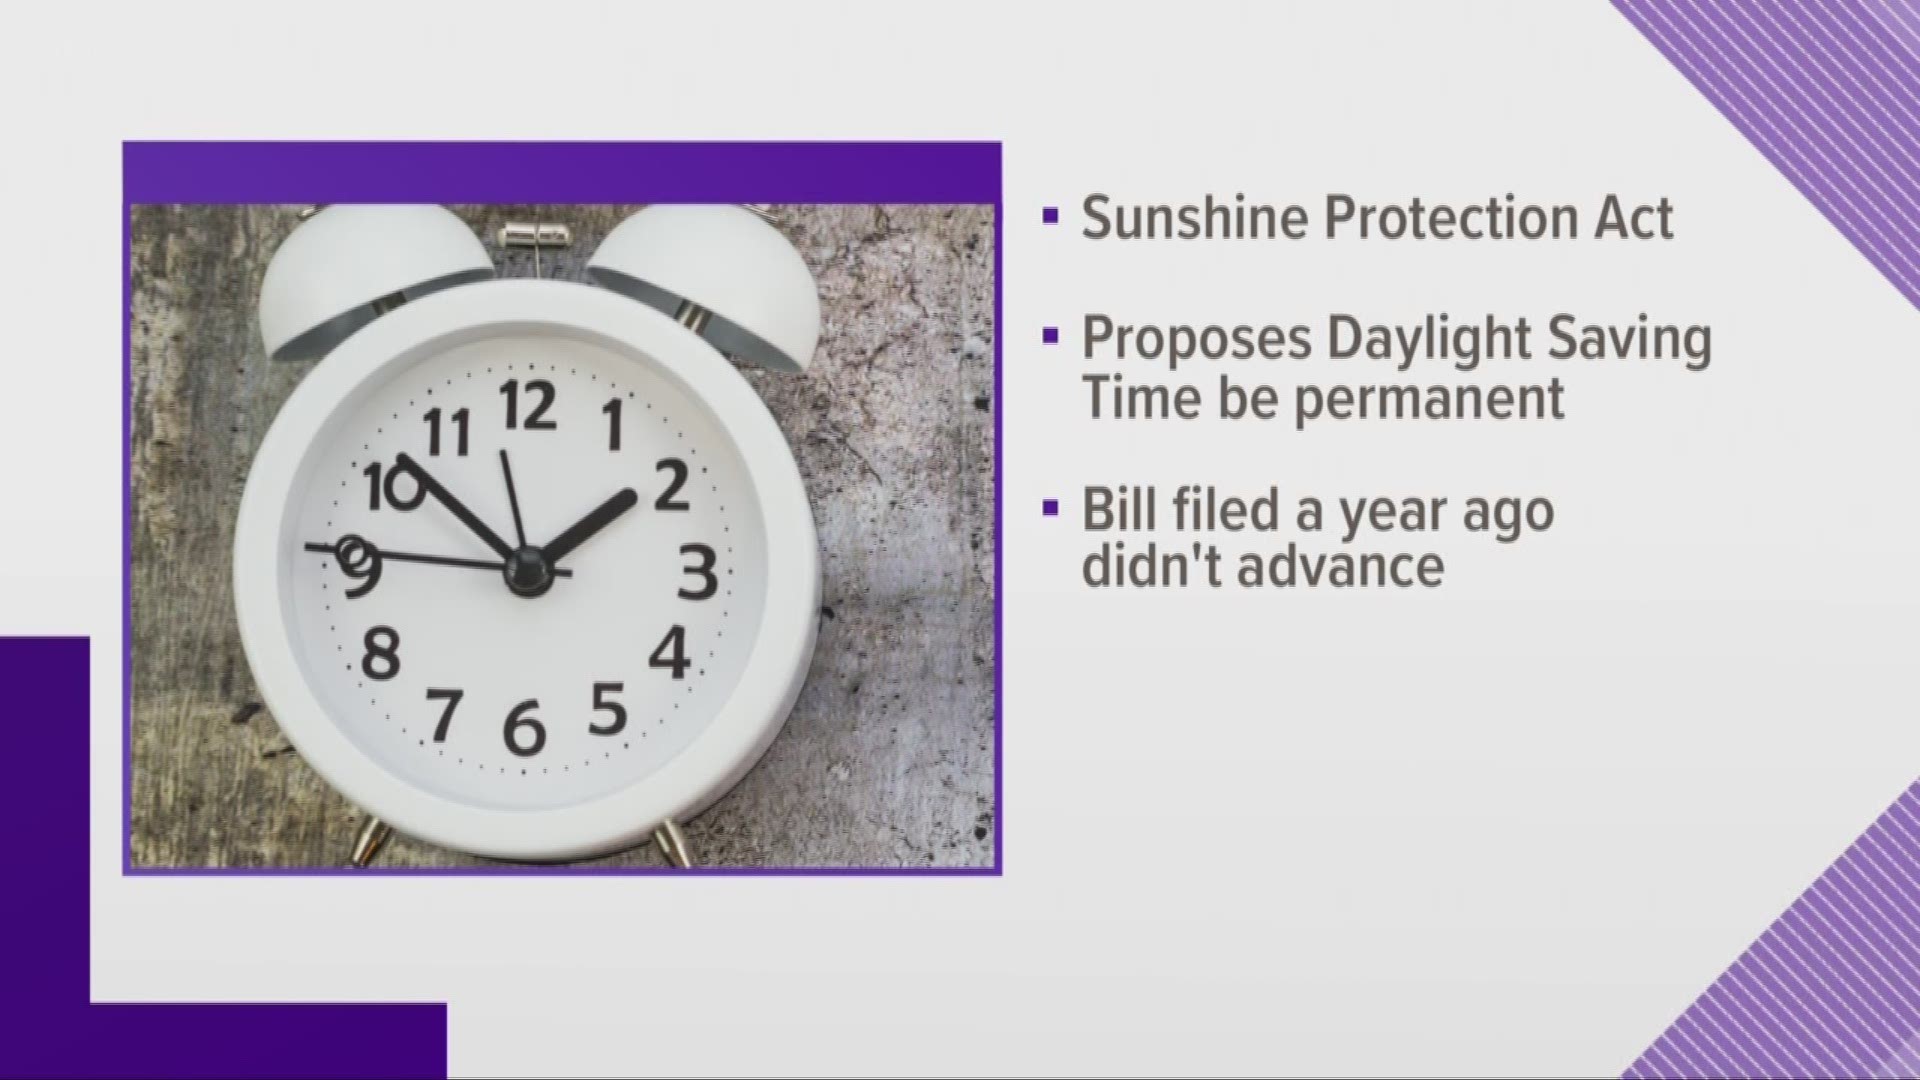 It was originally filed a year ago and would end Daylight Saving Time as we know it.